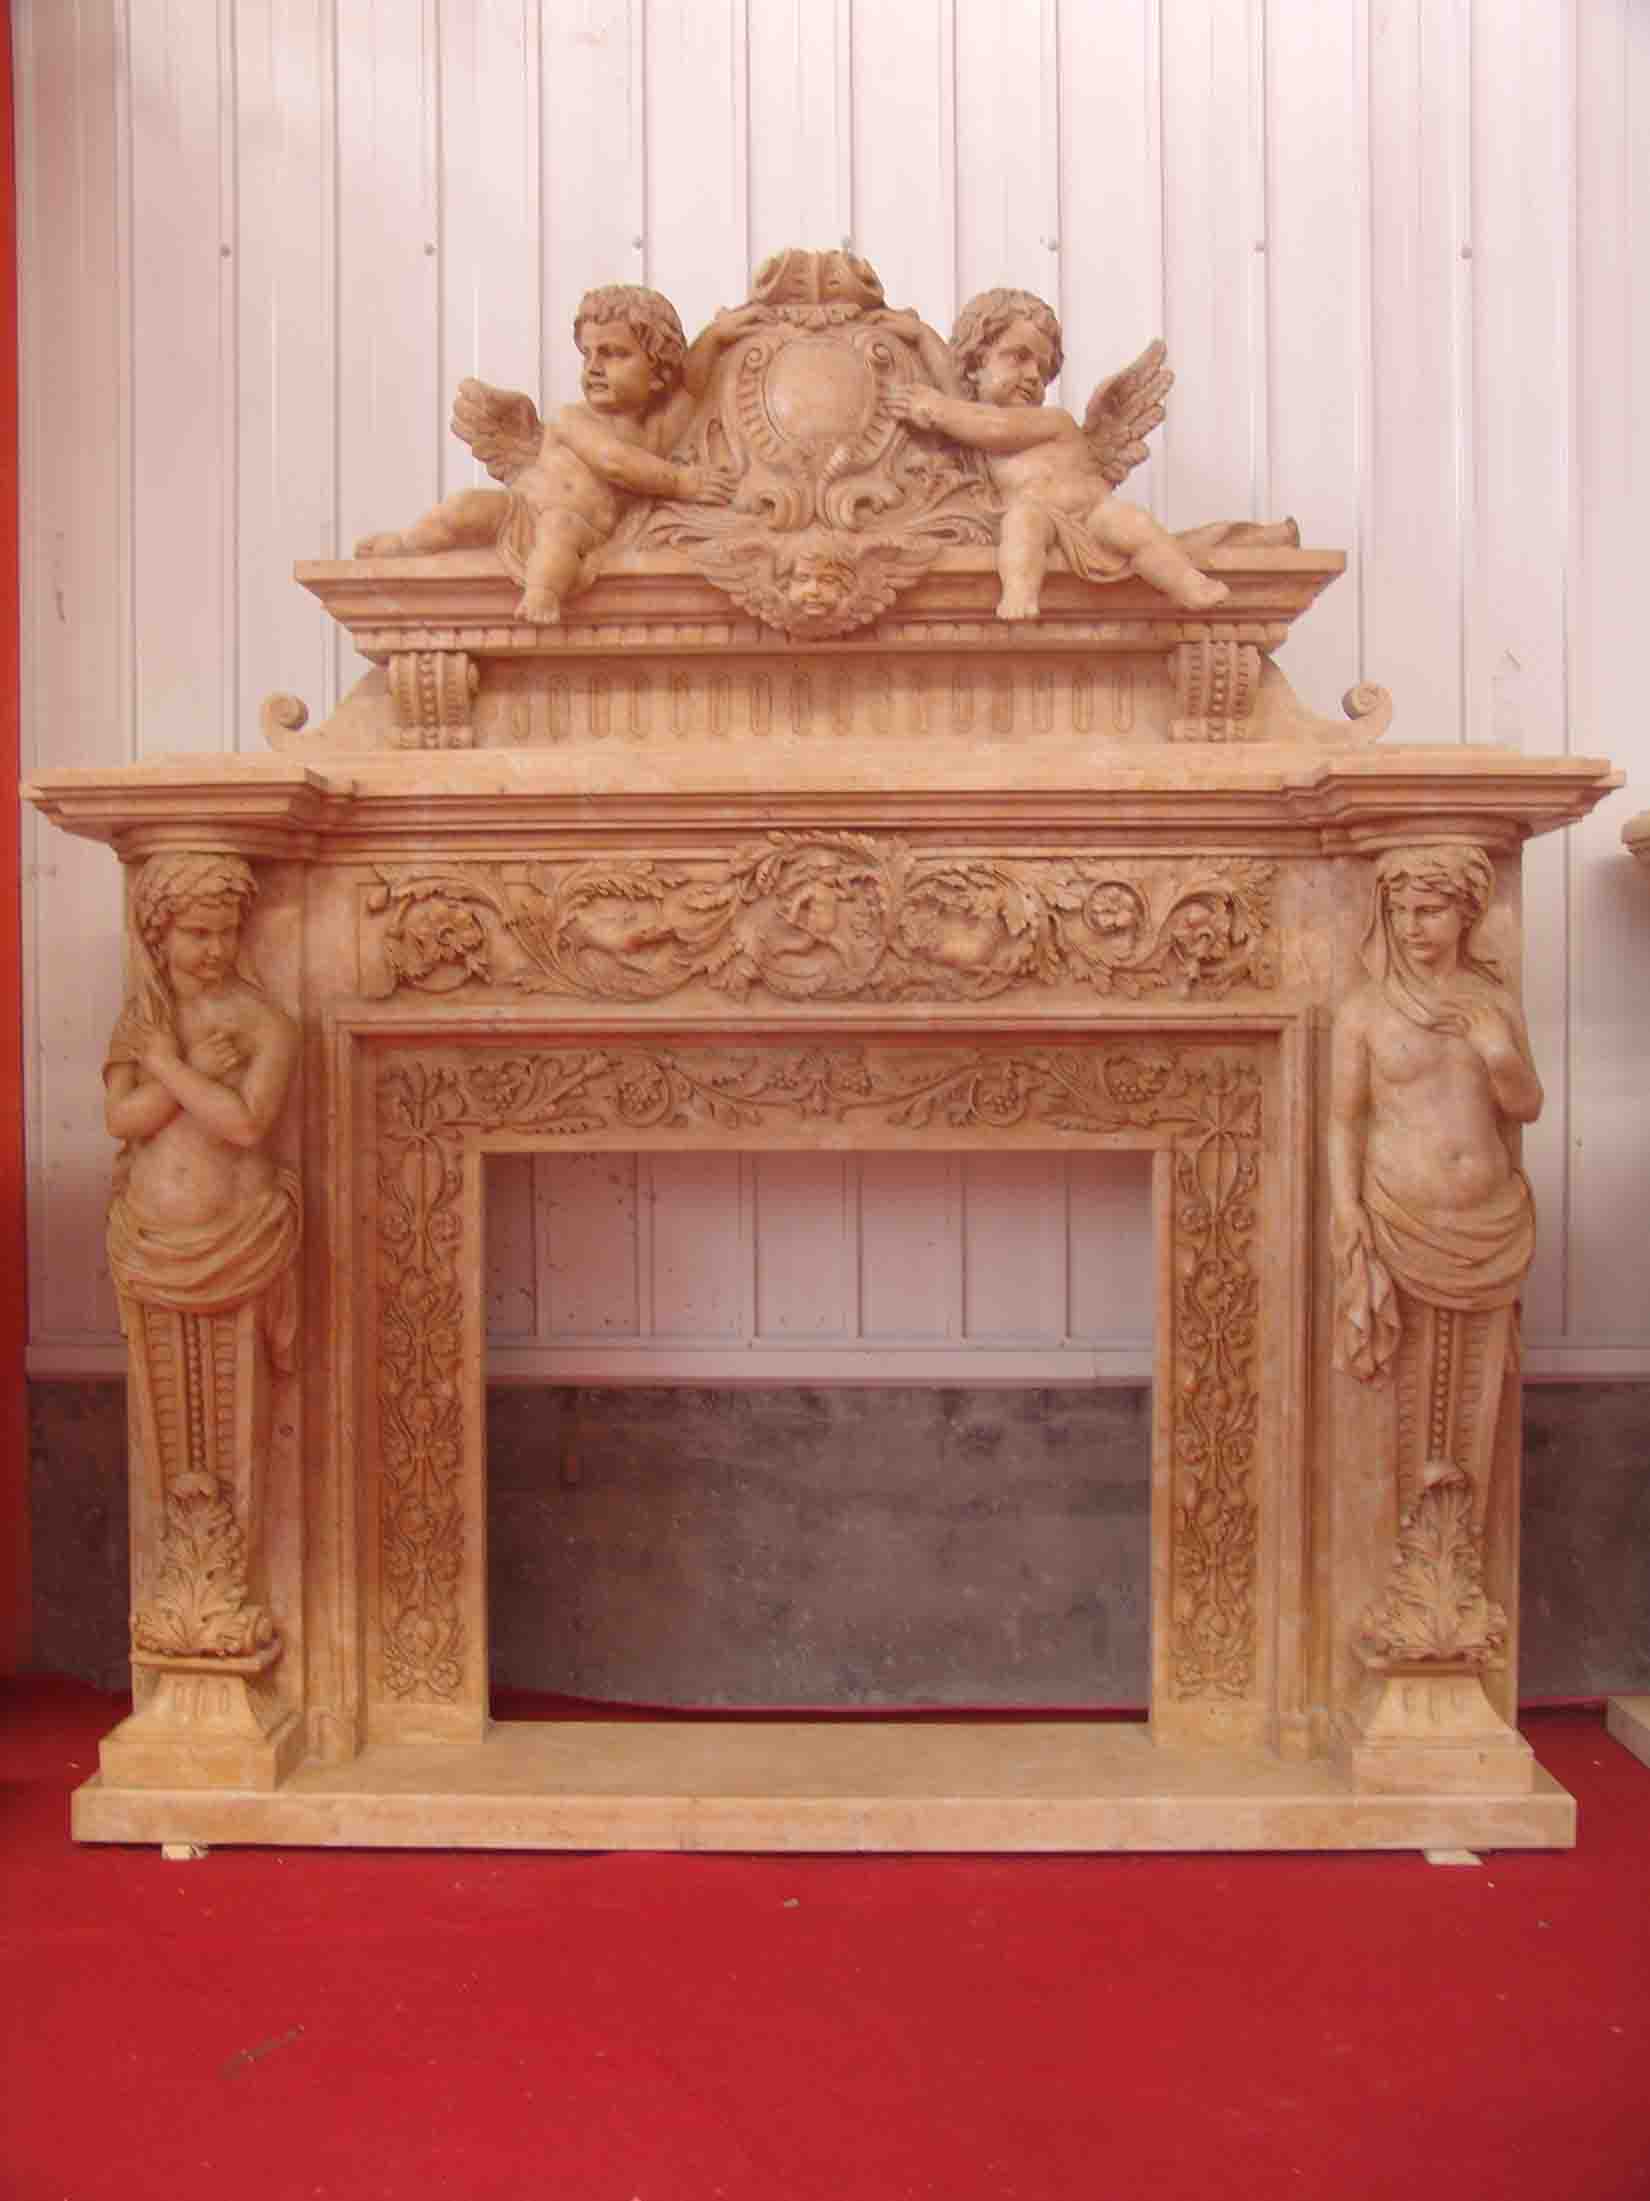  Stone Fireplace, Marble Fireplace, Stone Carving (Cheminée en pierre, cheminée en marbre, Stone Carving)